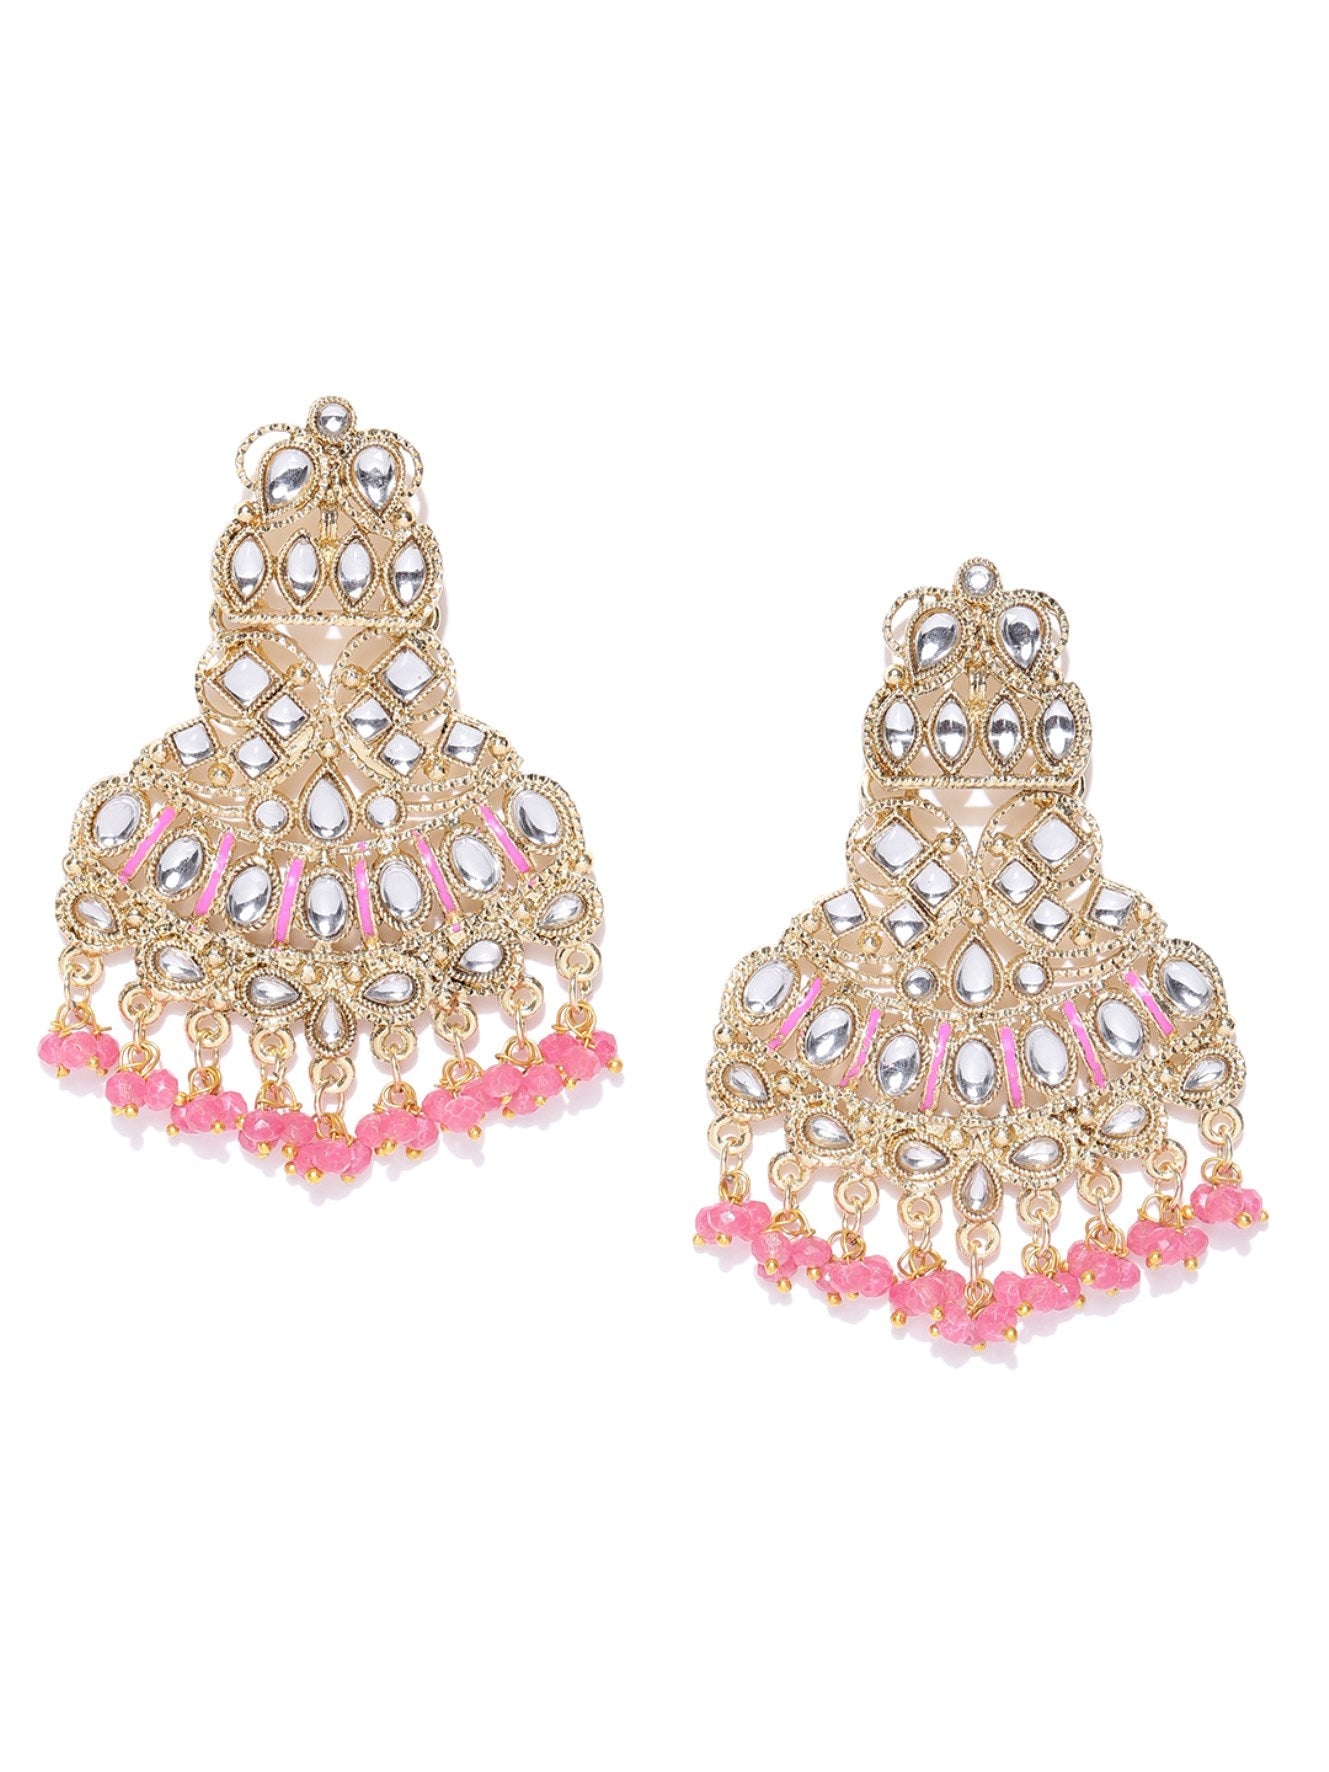 Designer Gold Plated Kundan Earrings With Pink Beads For Women And Girls - NOZ2TOZ